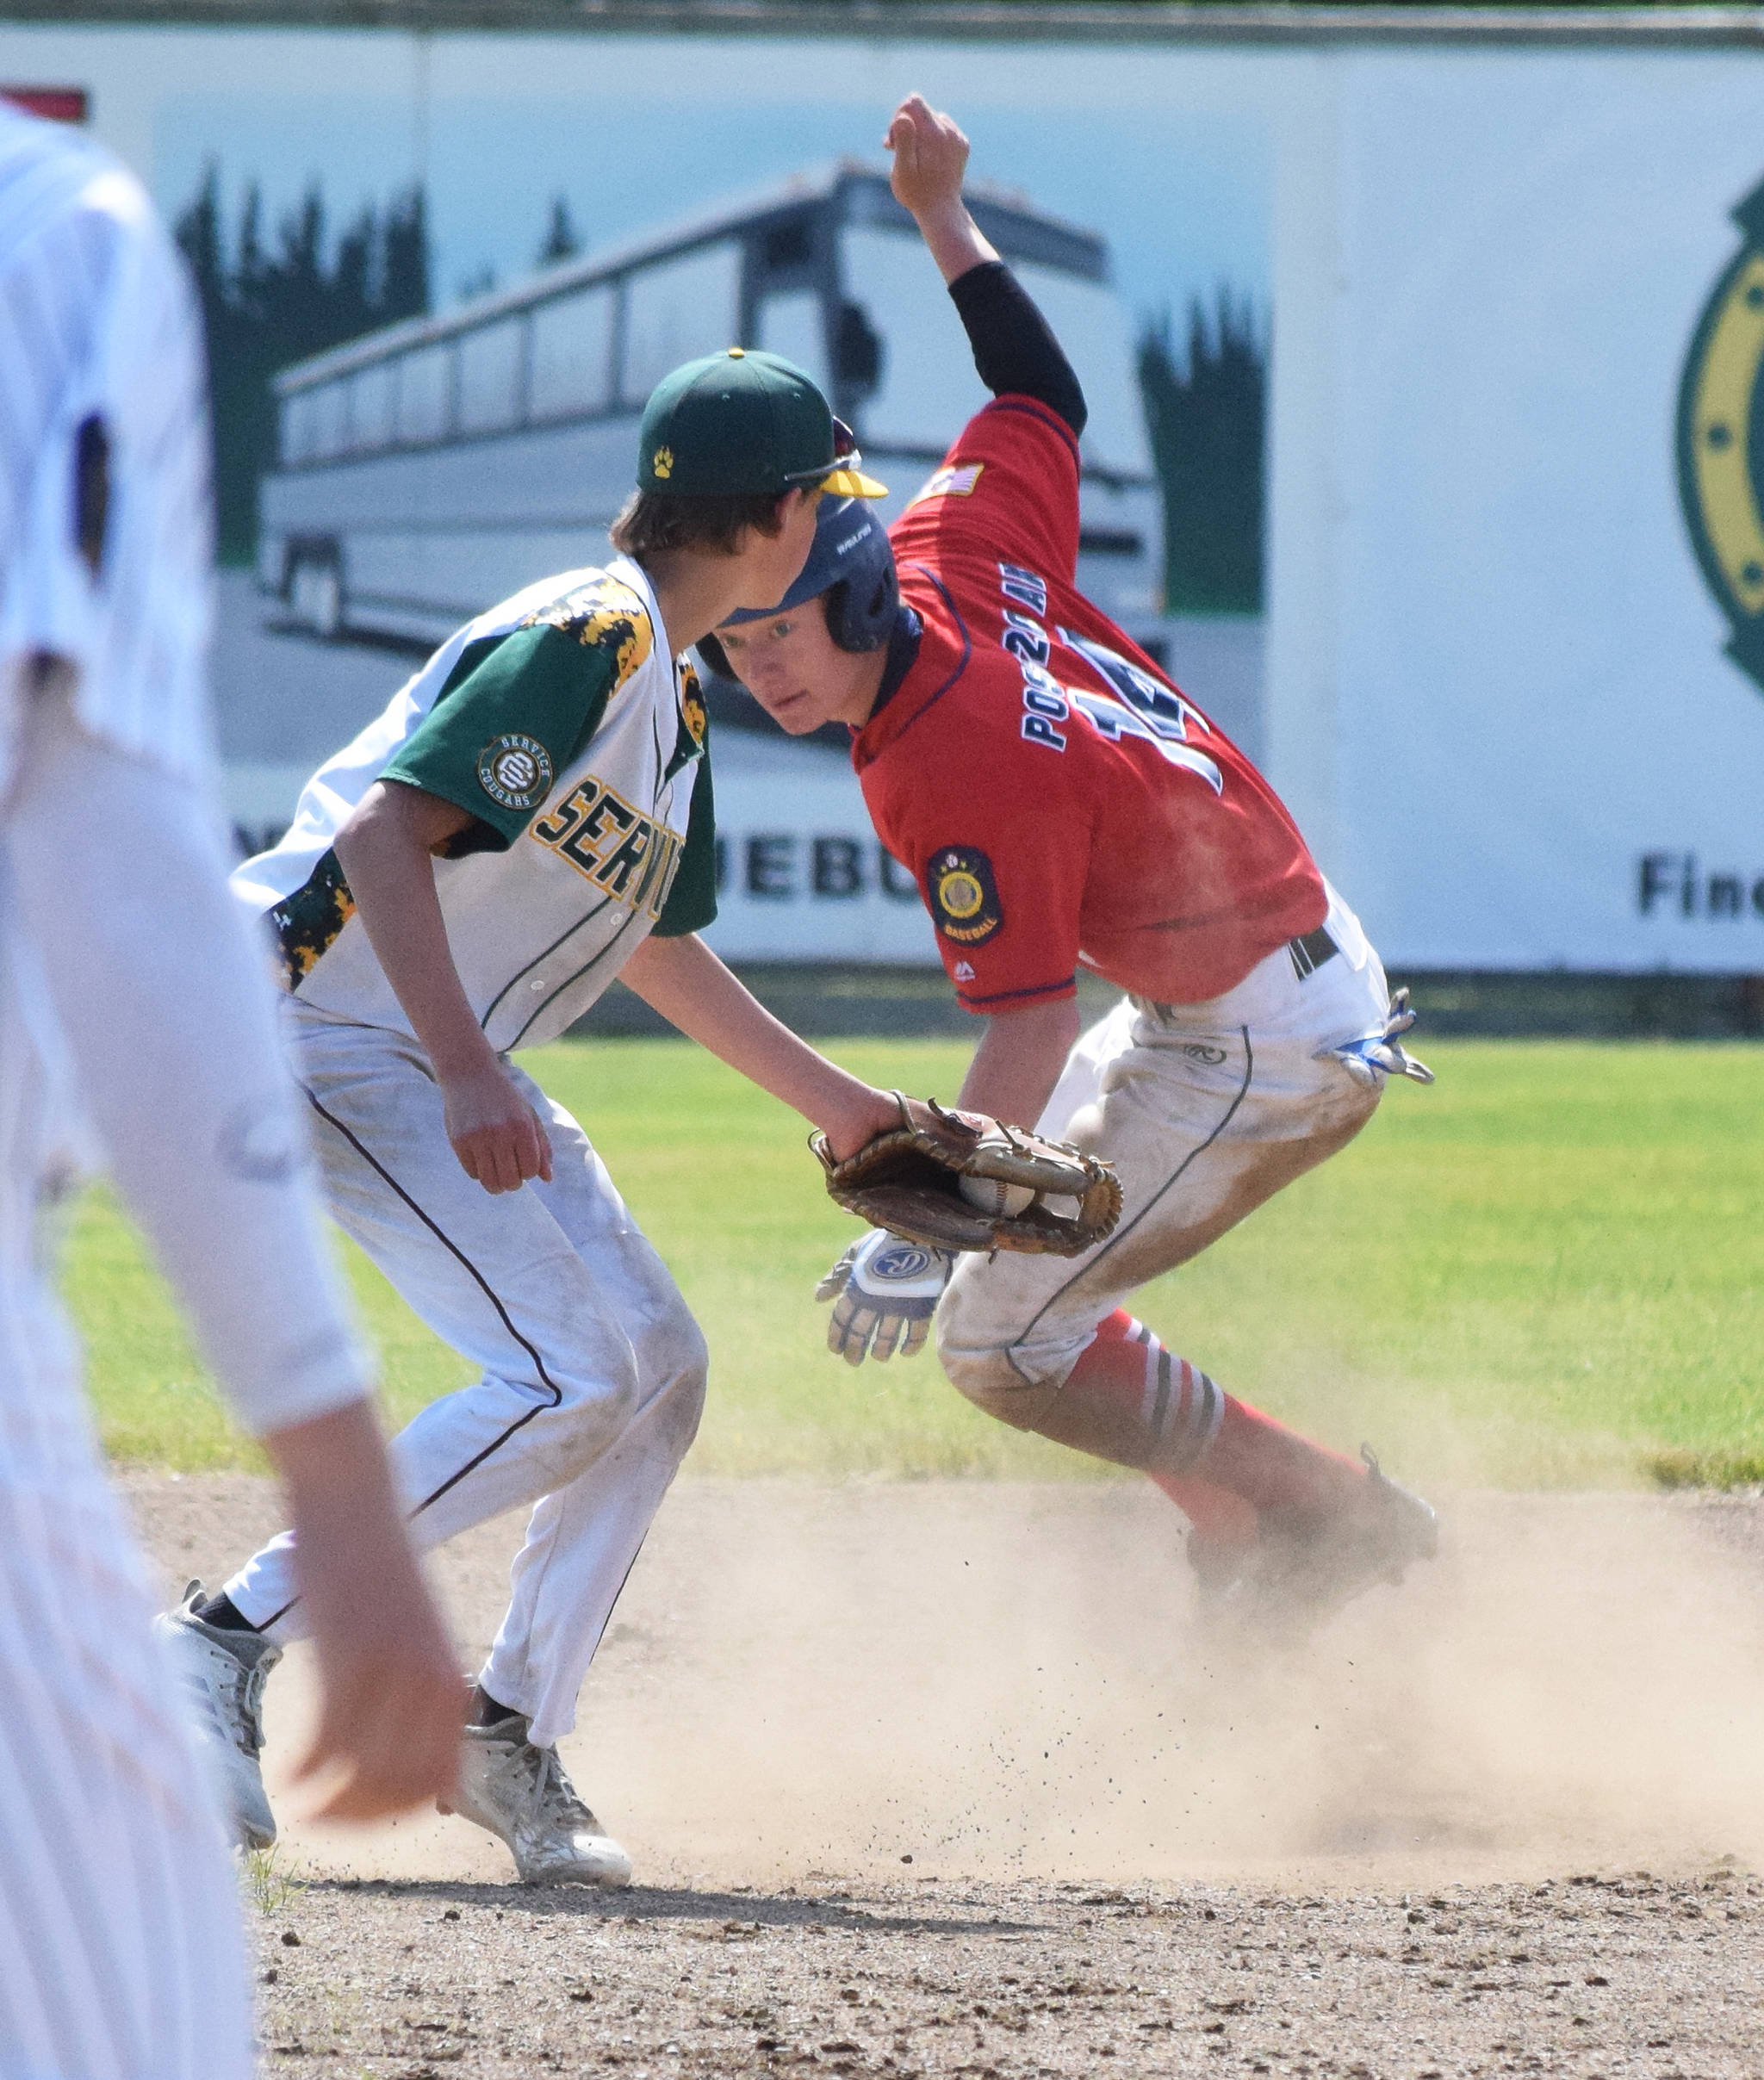 The Twins’ Mose Hayes evades the tag of Service second baseman Kyle Andrew (left) Saturday, June 22, 2019, at Coral Seymour Memorial Park in Kenai. (Photo by Joey Klecka/Peninsula Clarion)